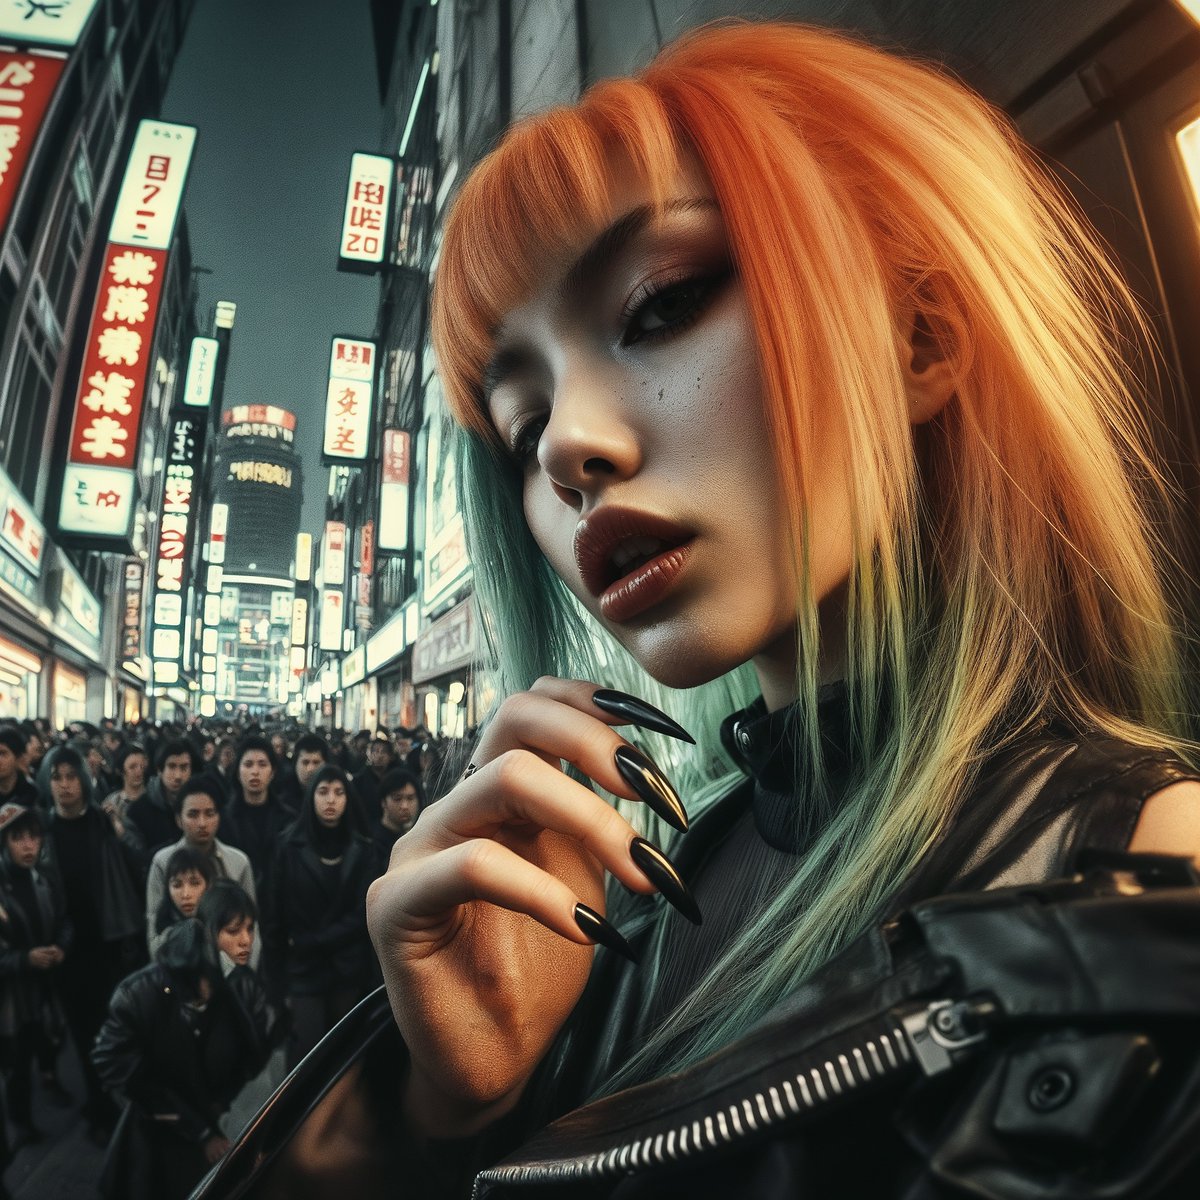 #AI #aigirl #Cyberpunk #aiart #aiartwork #aiartcommunity #scifiart #virtualphotography #portraits 
Neon Noir: Chronicles of a Cyberpunk Bad Girl in Neo-Tokyo 2124. 🏙️🕴️‍♀️😎🙃